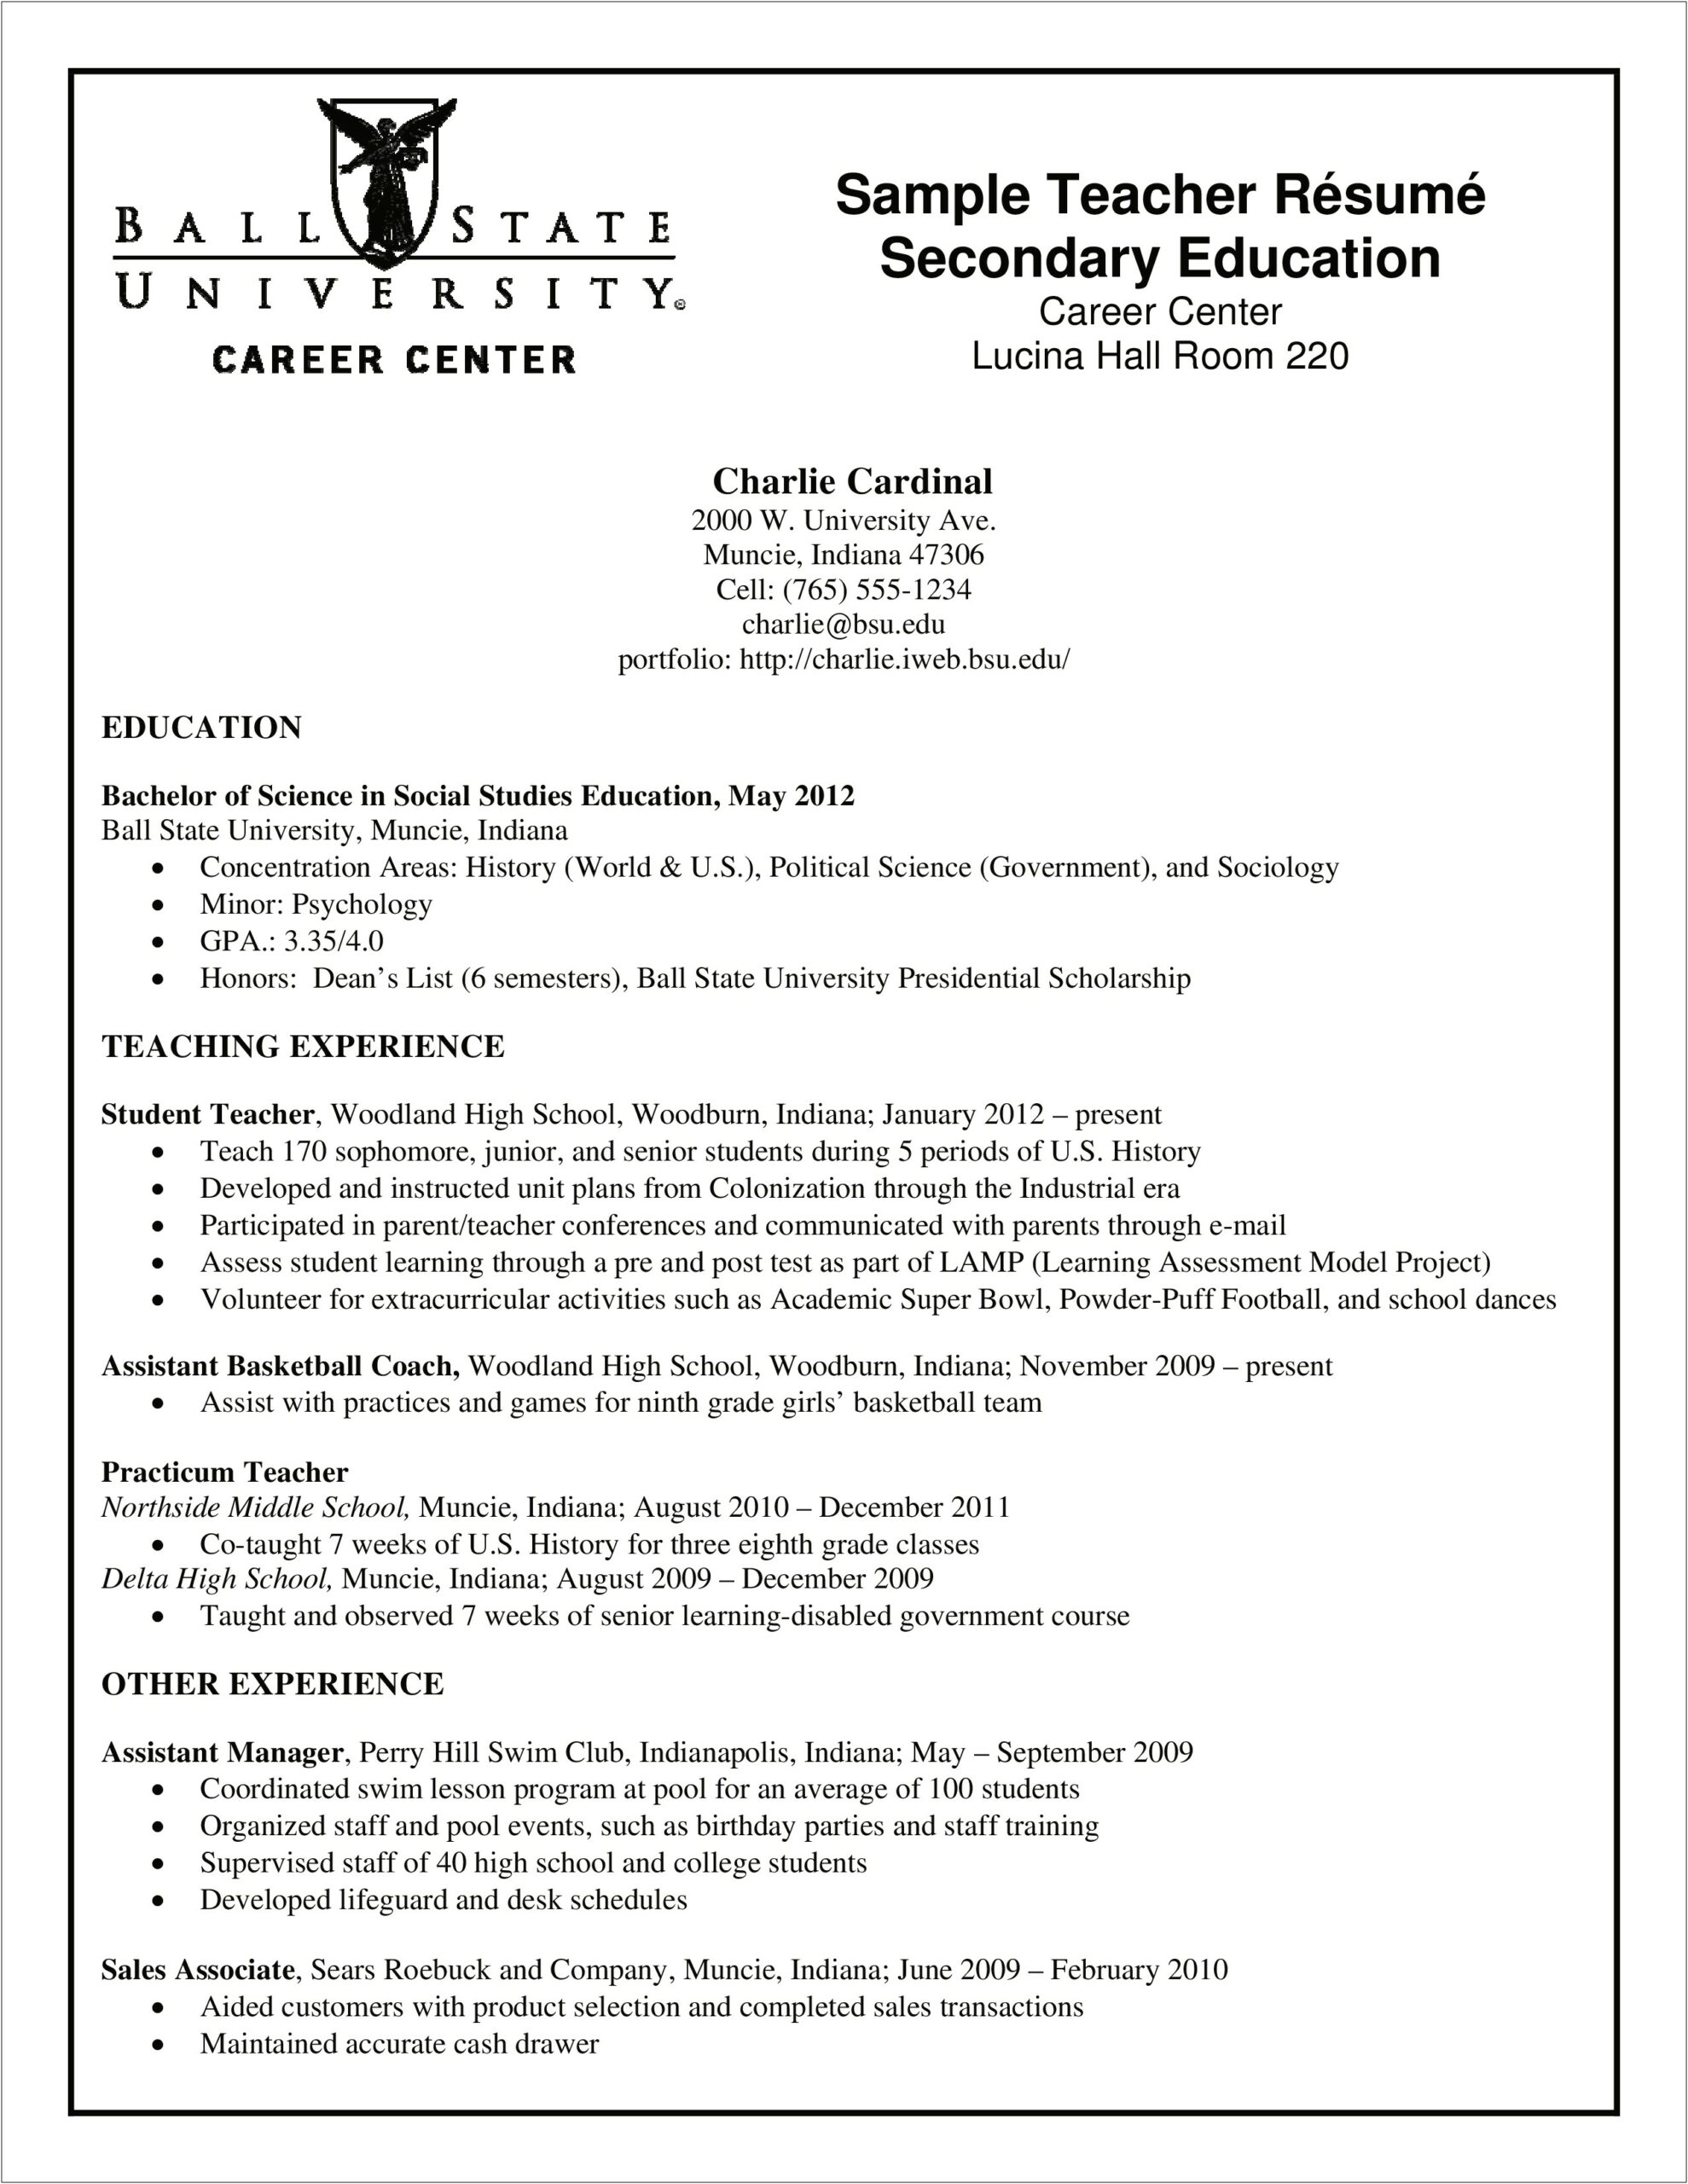 Examples Education Experience In Sociology For Resume